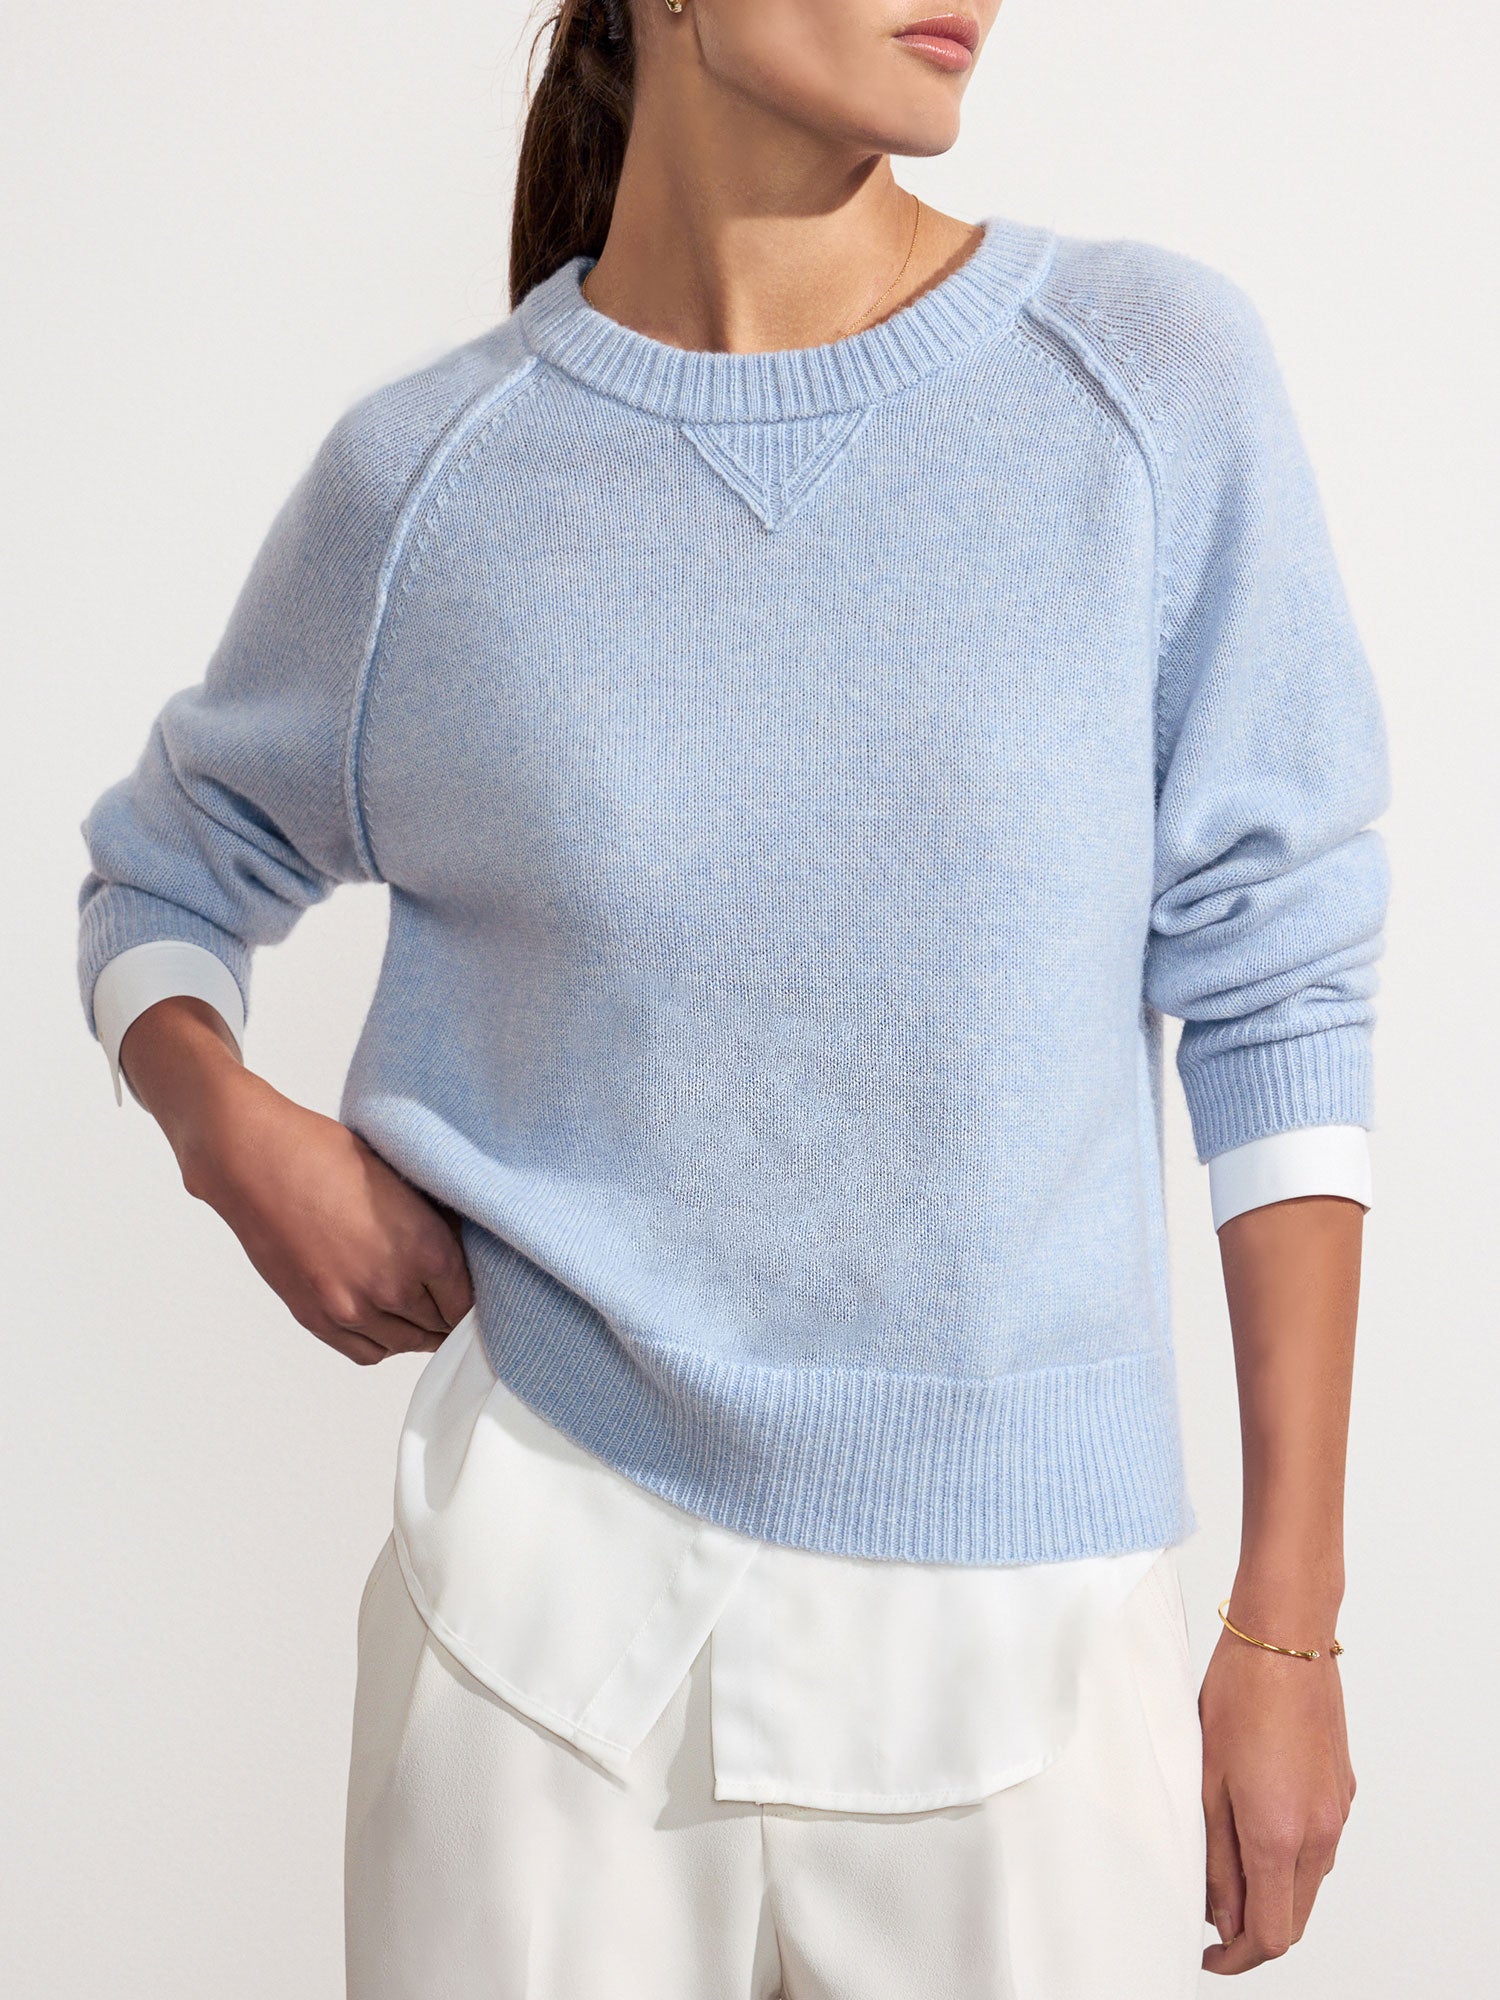 Looker Layered crewneck light blue sweater  front view 2